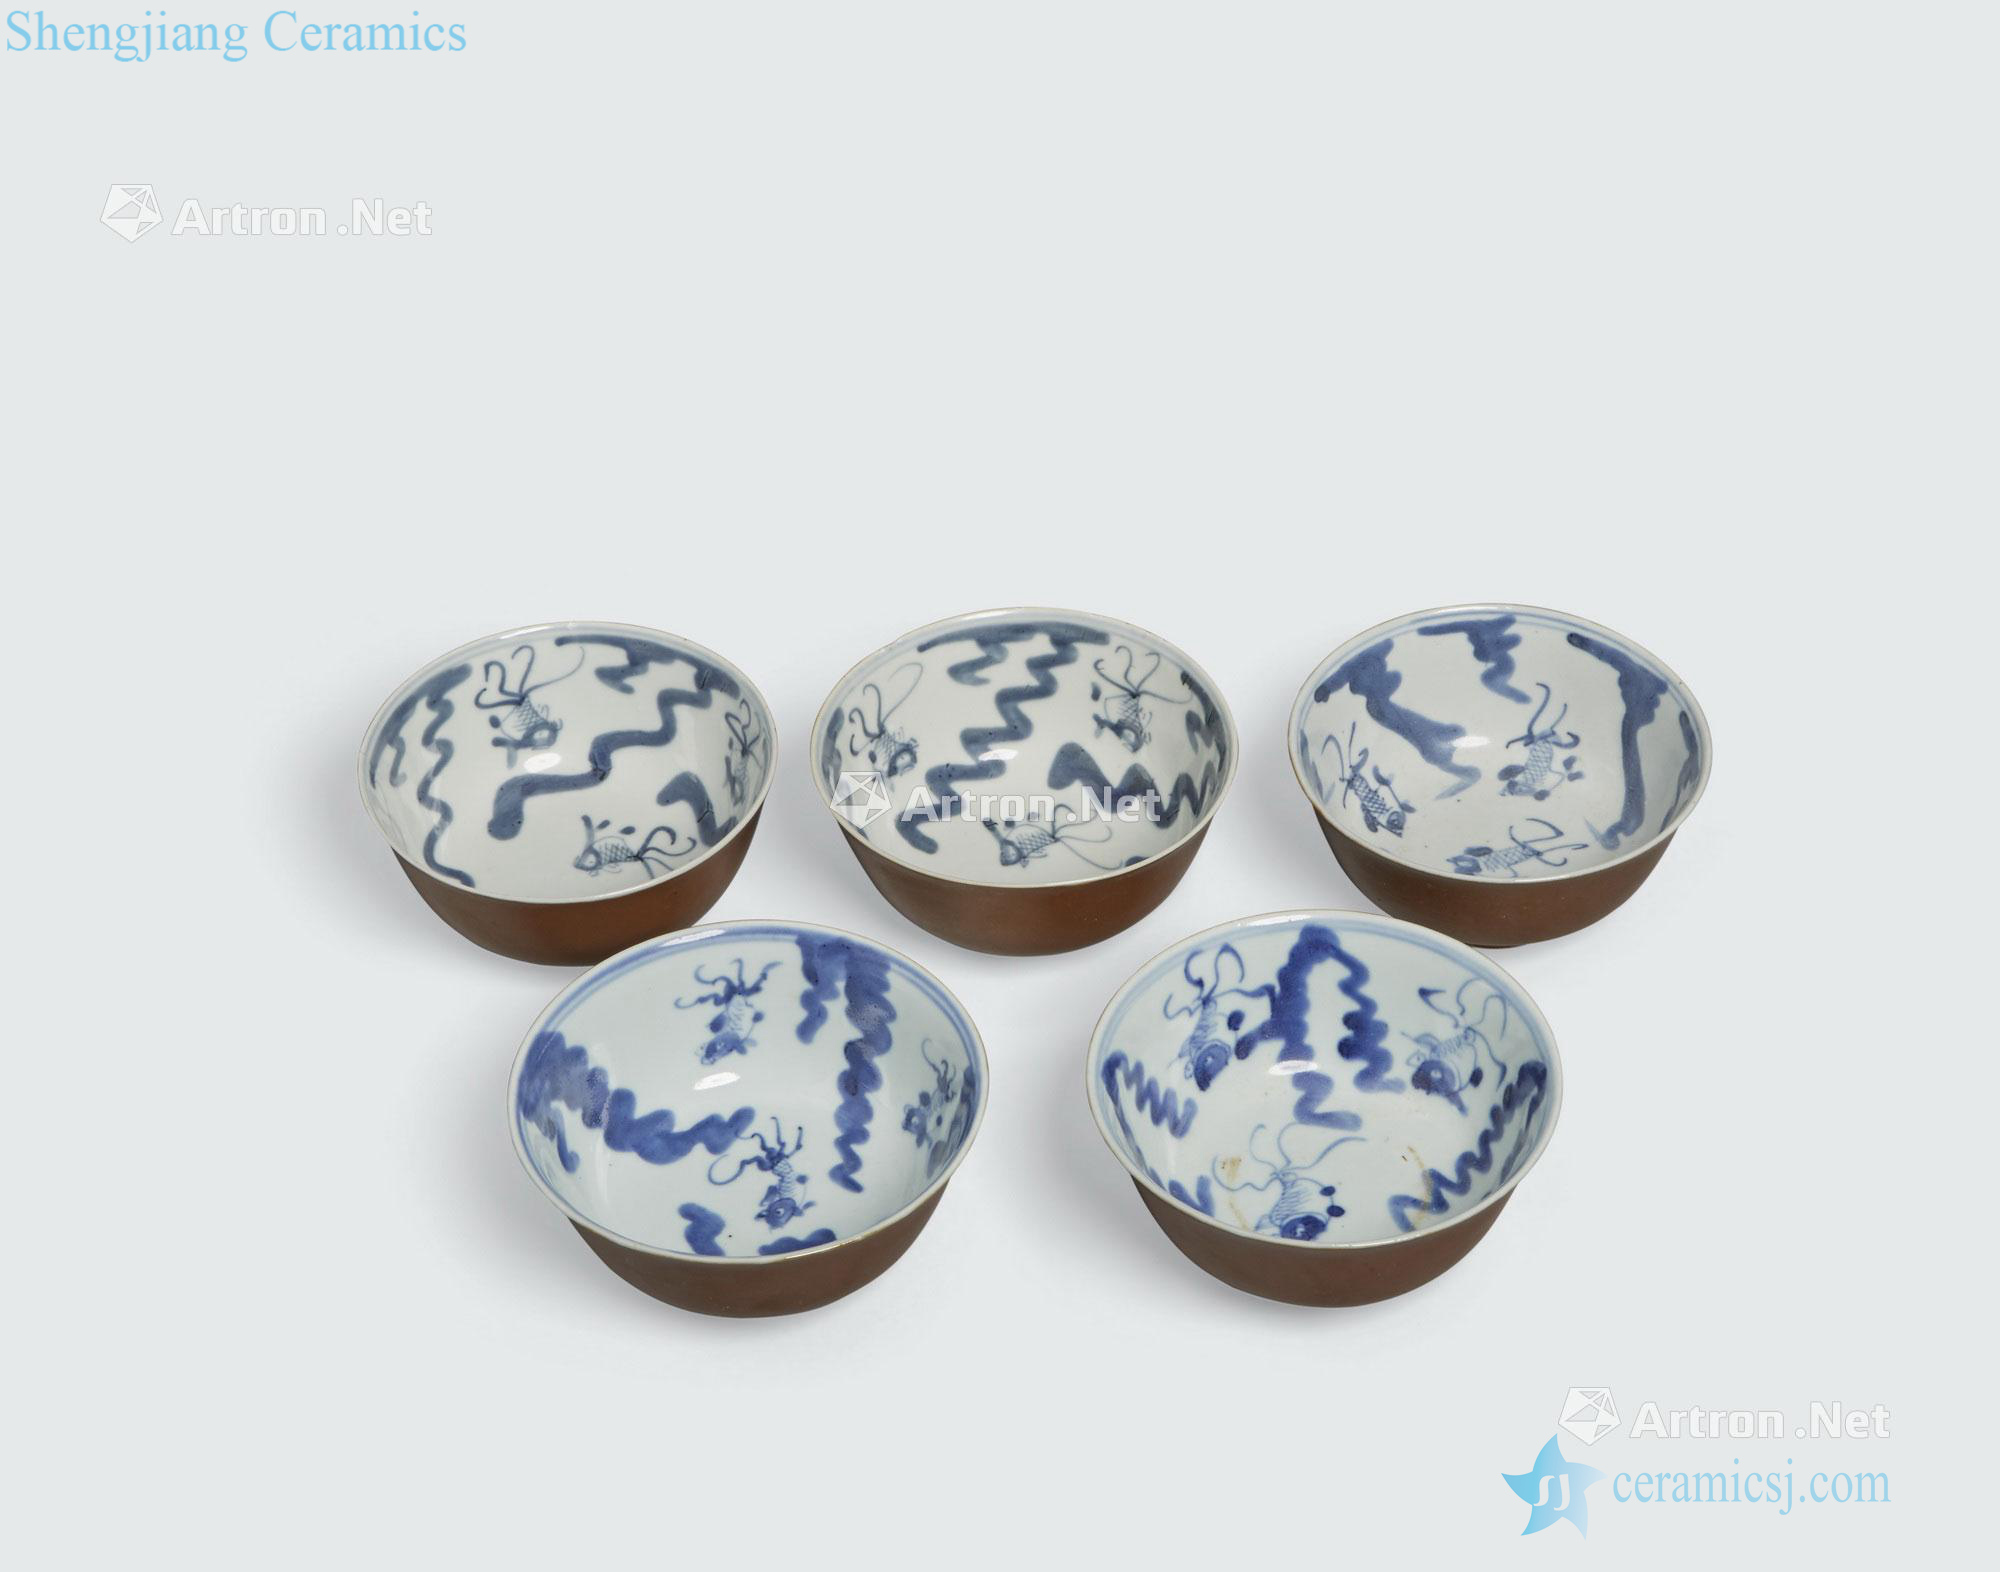 The Qing dynasty A GROUP OF FIVE BROWN GLAZED BOWLS WITH UNDERGLAZE BLUE DECORATION